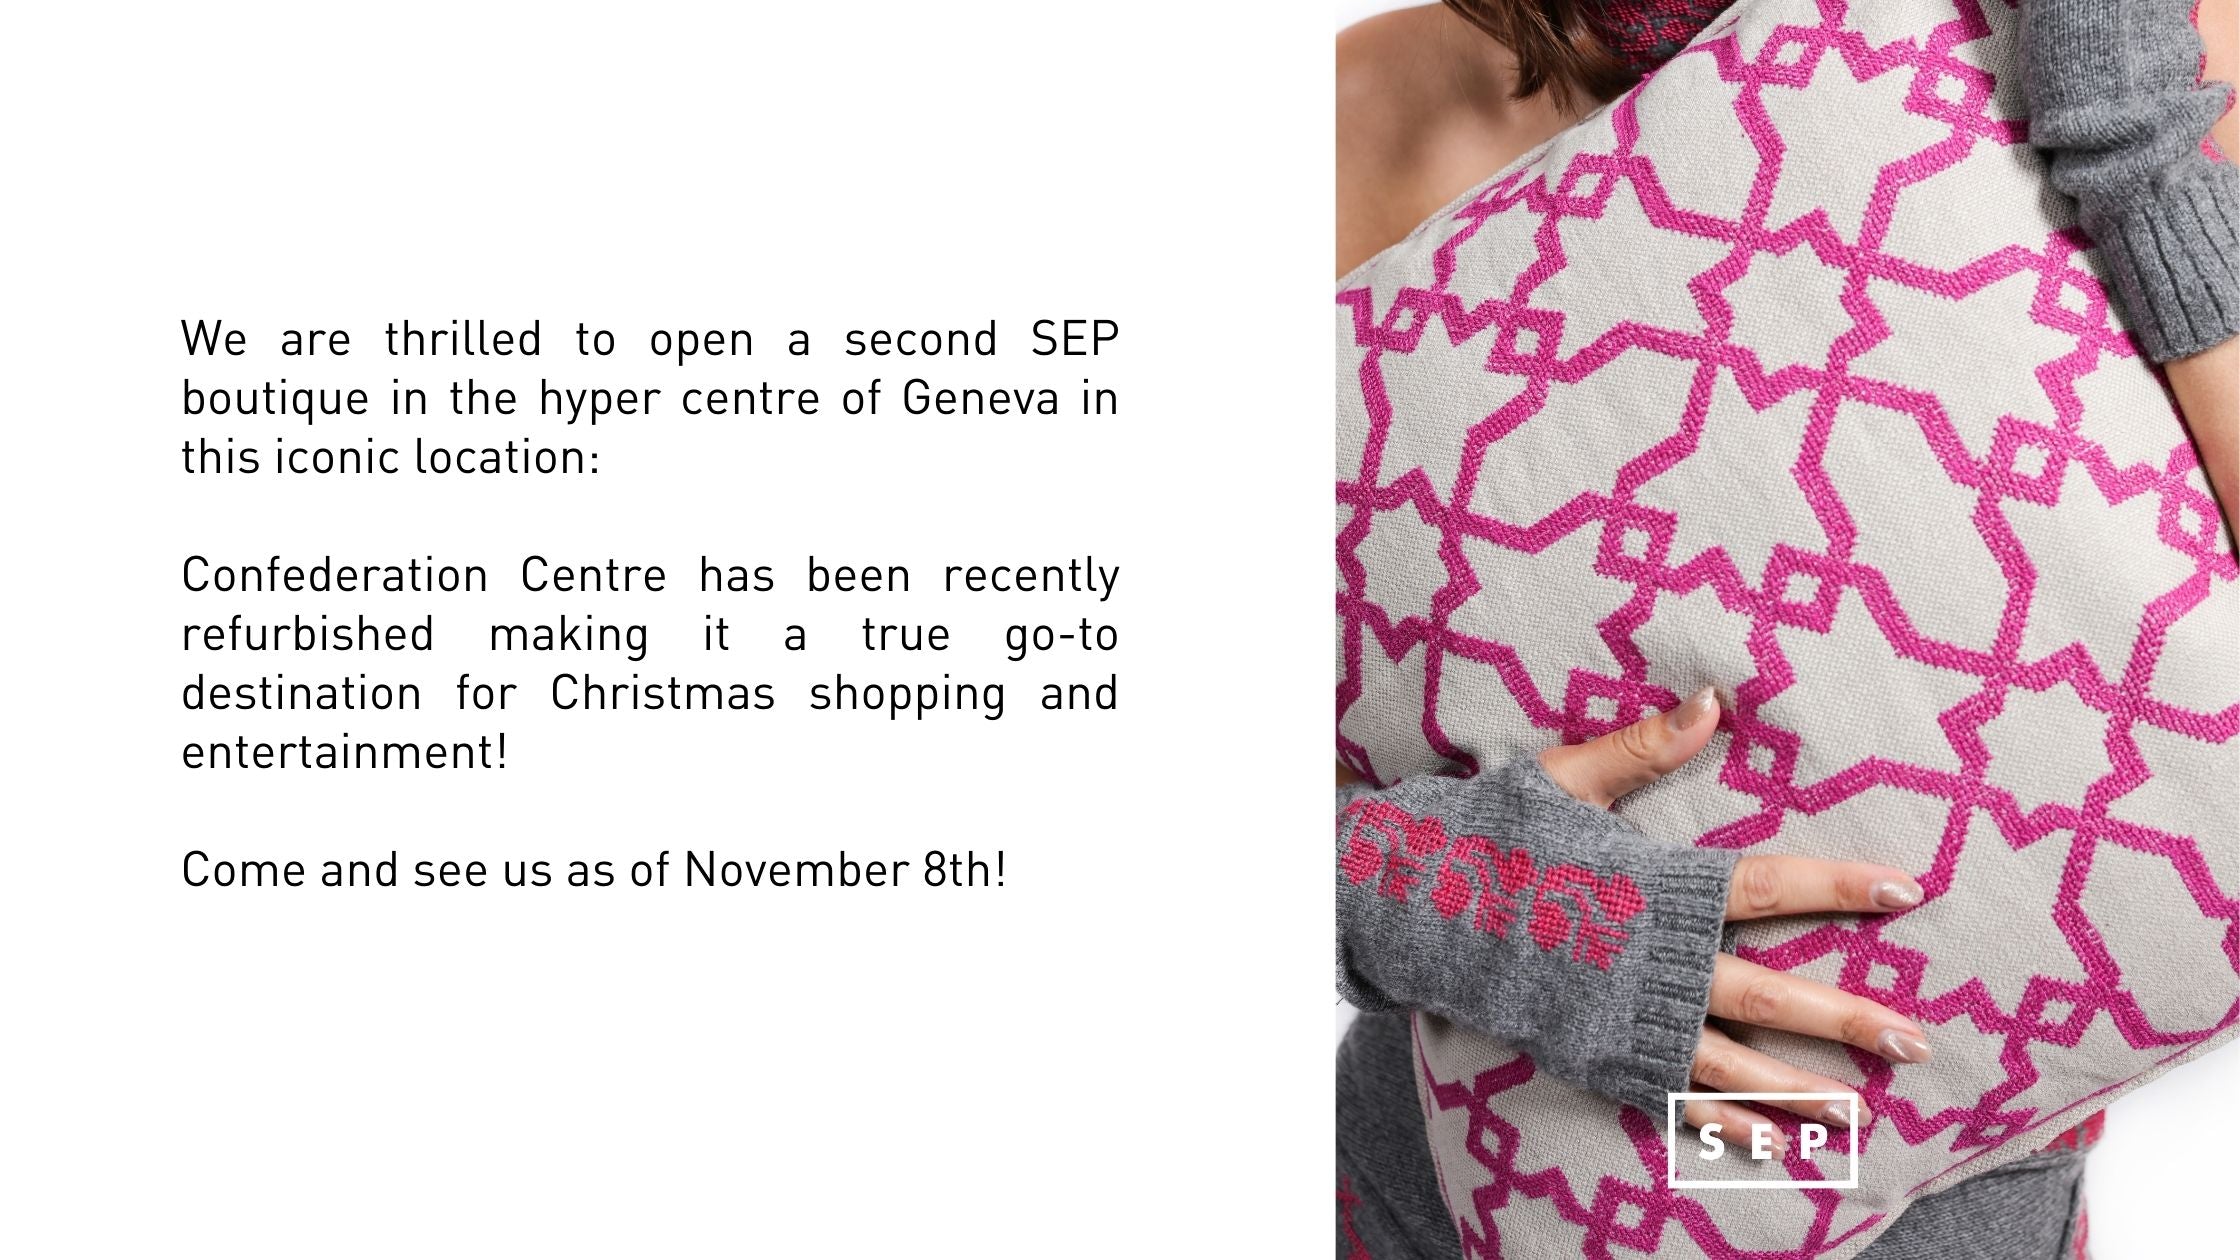 We are thrilled to open a second SEP boutique in the hyper centre of Geneva in this iconic location:   Confederation Centre has been recently refurbished making it a true go-to destination for Christmas shopping and entertainment!   Come and see us as of November 8th!